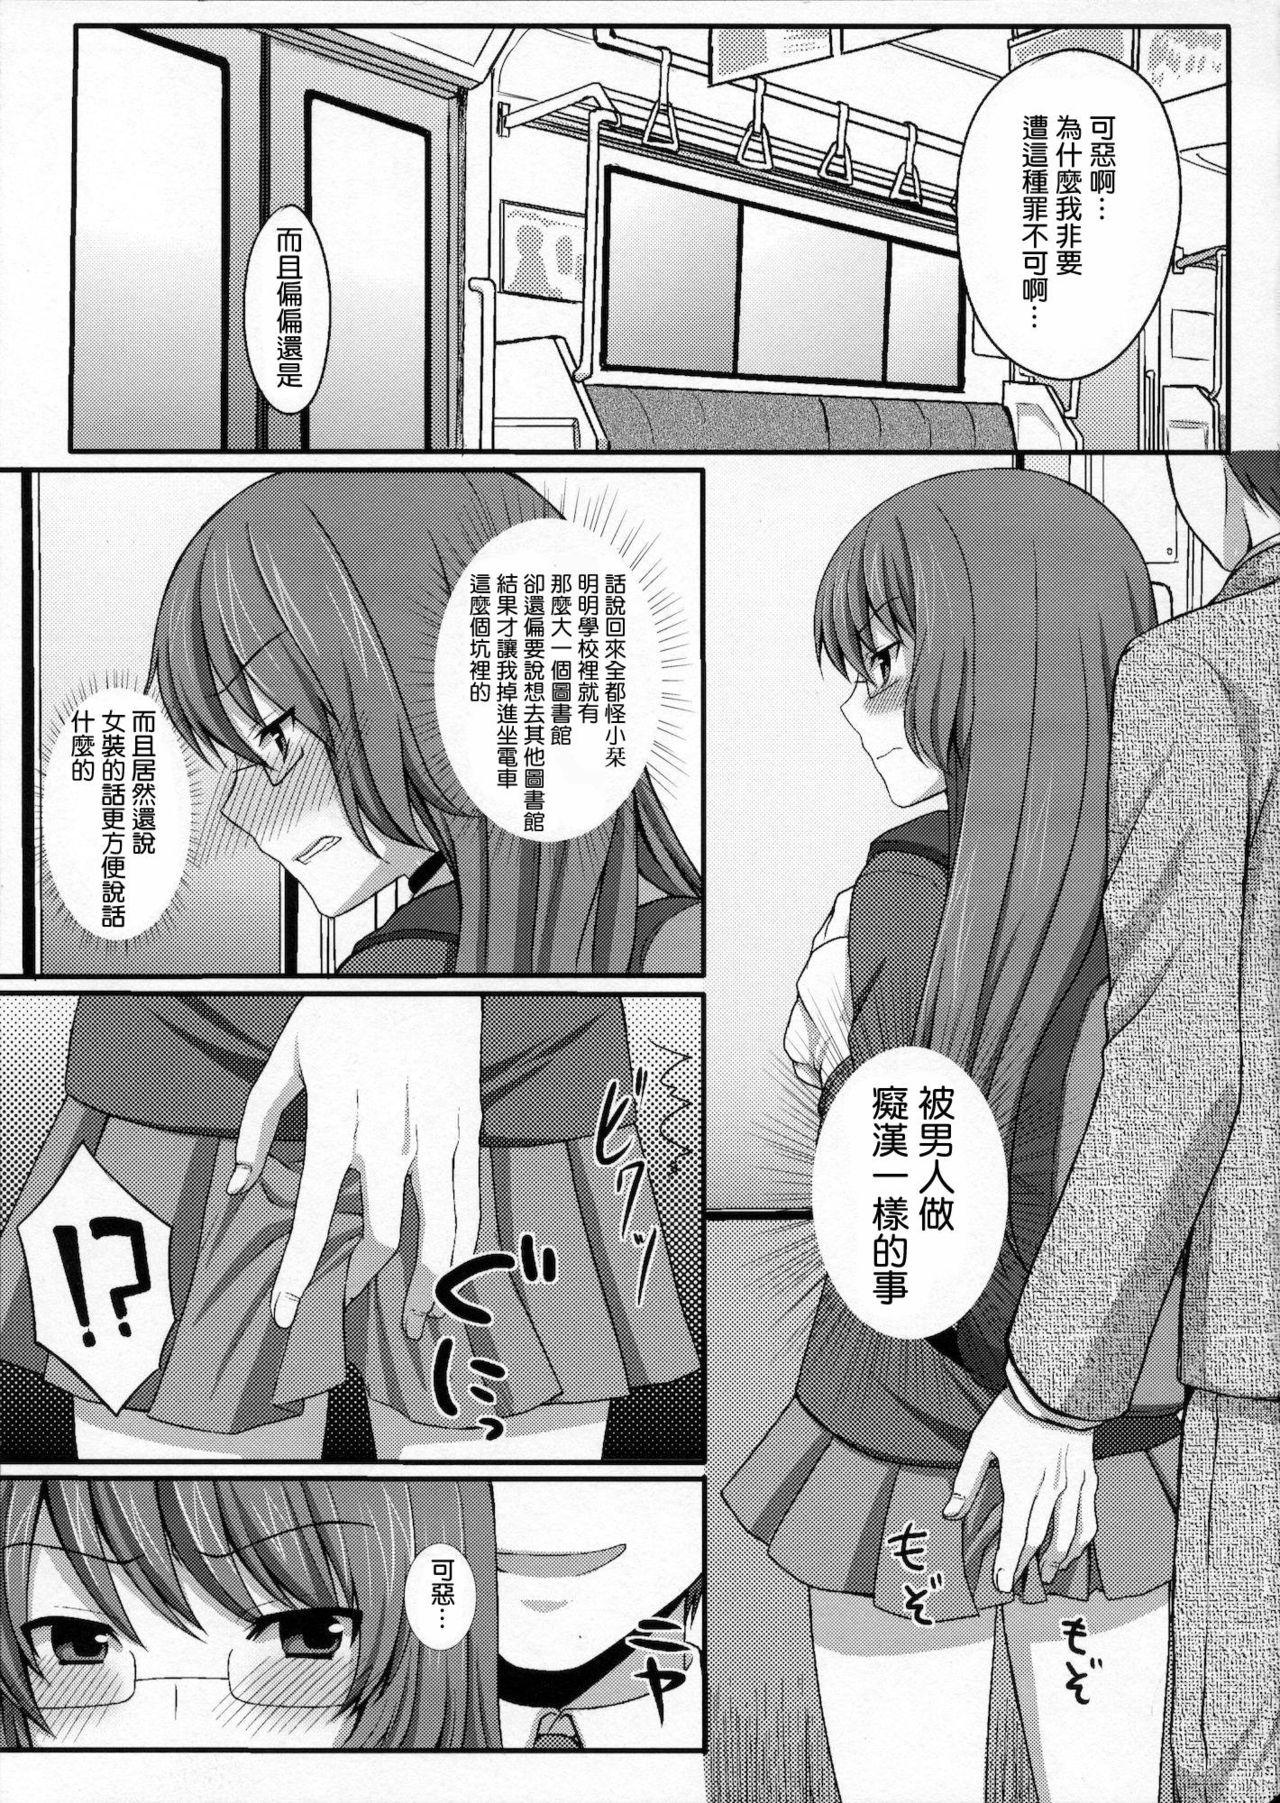 Mms Kami-sama o Chikan - The world god only knows Cam Girl - Page 2